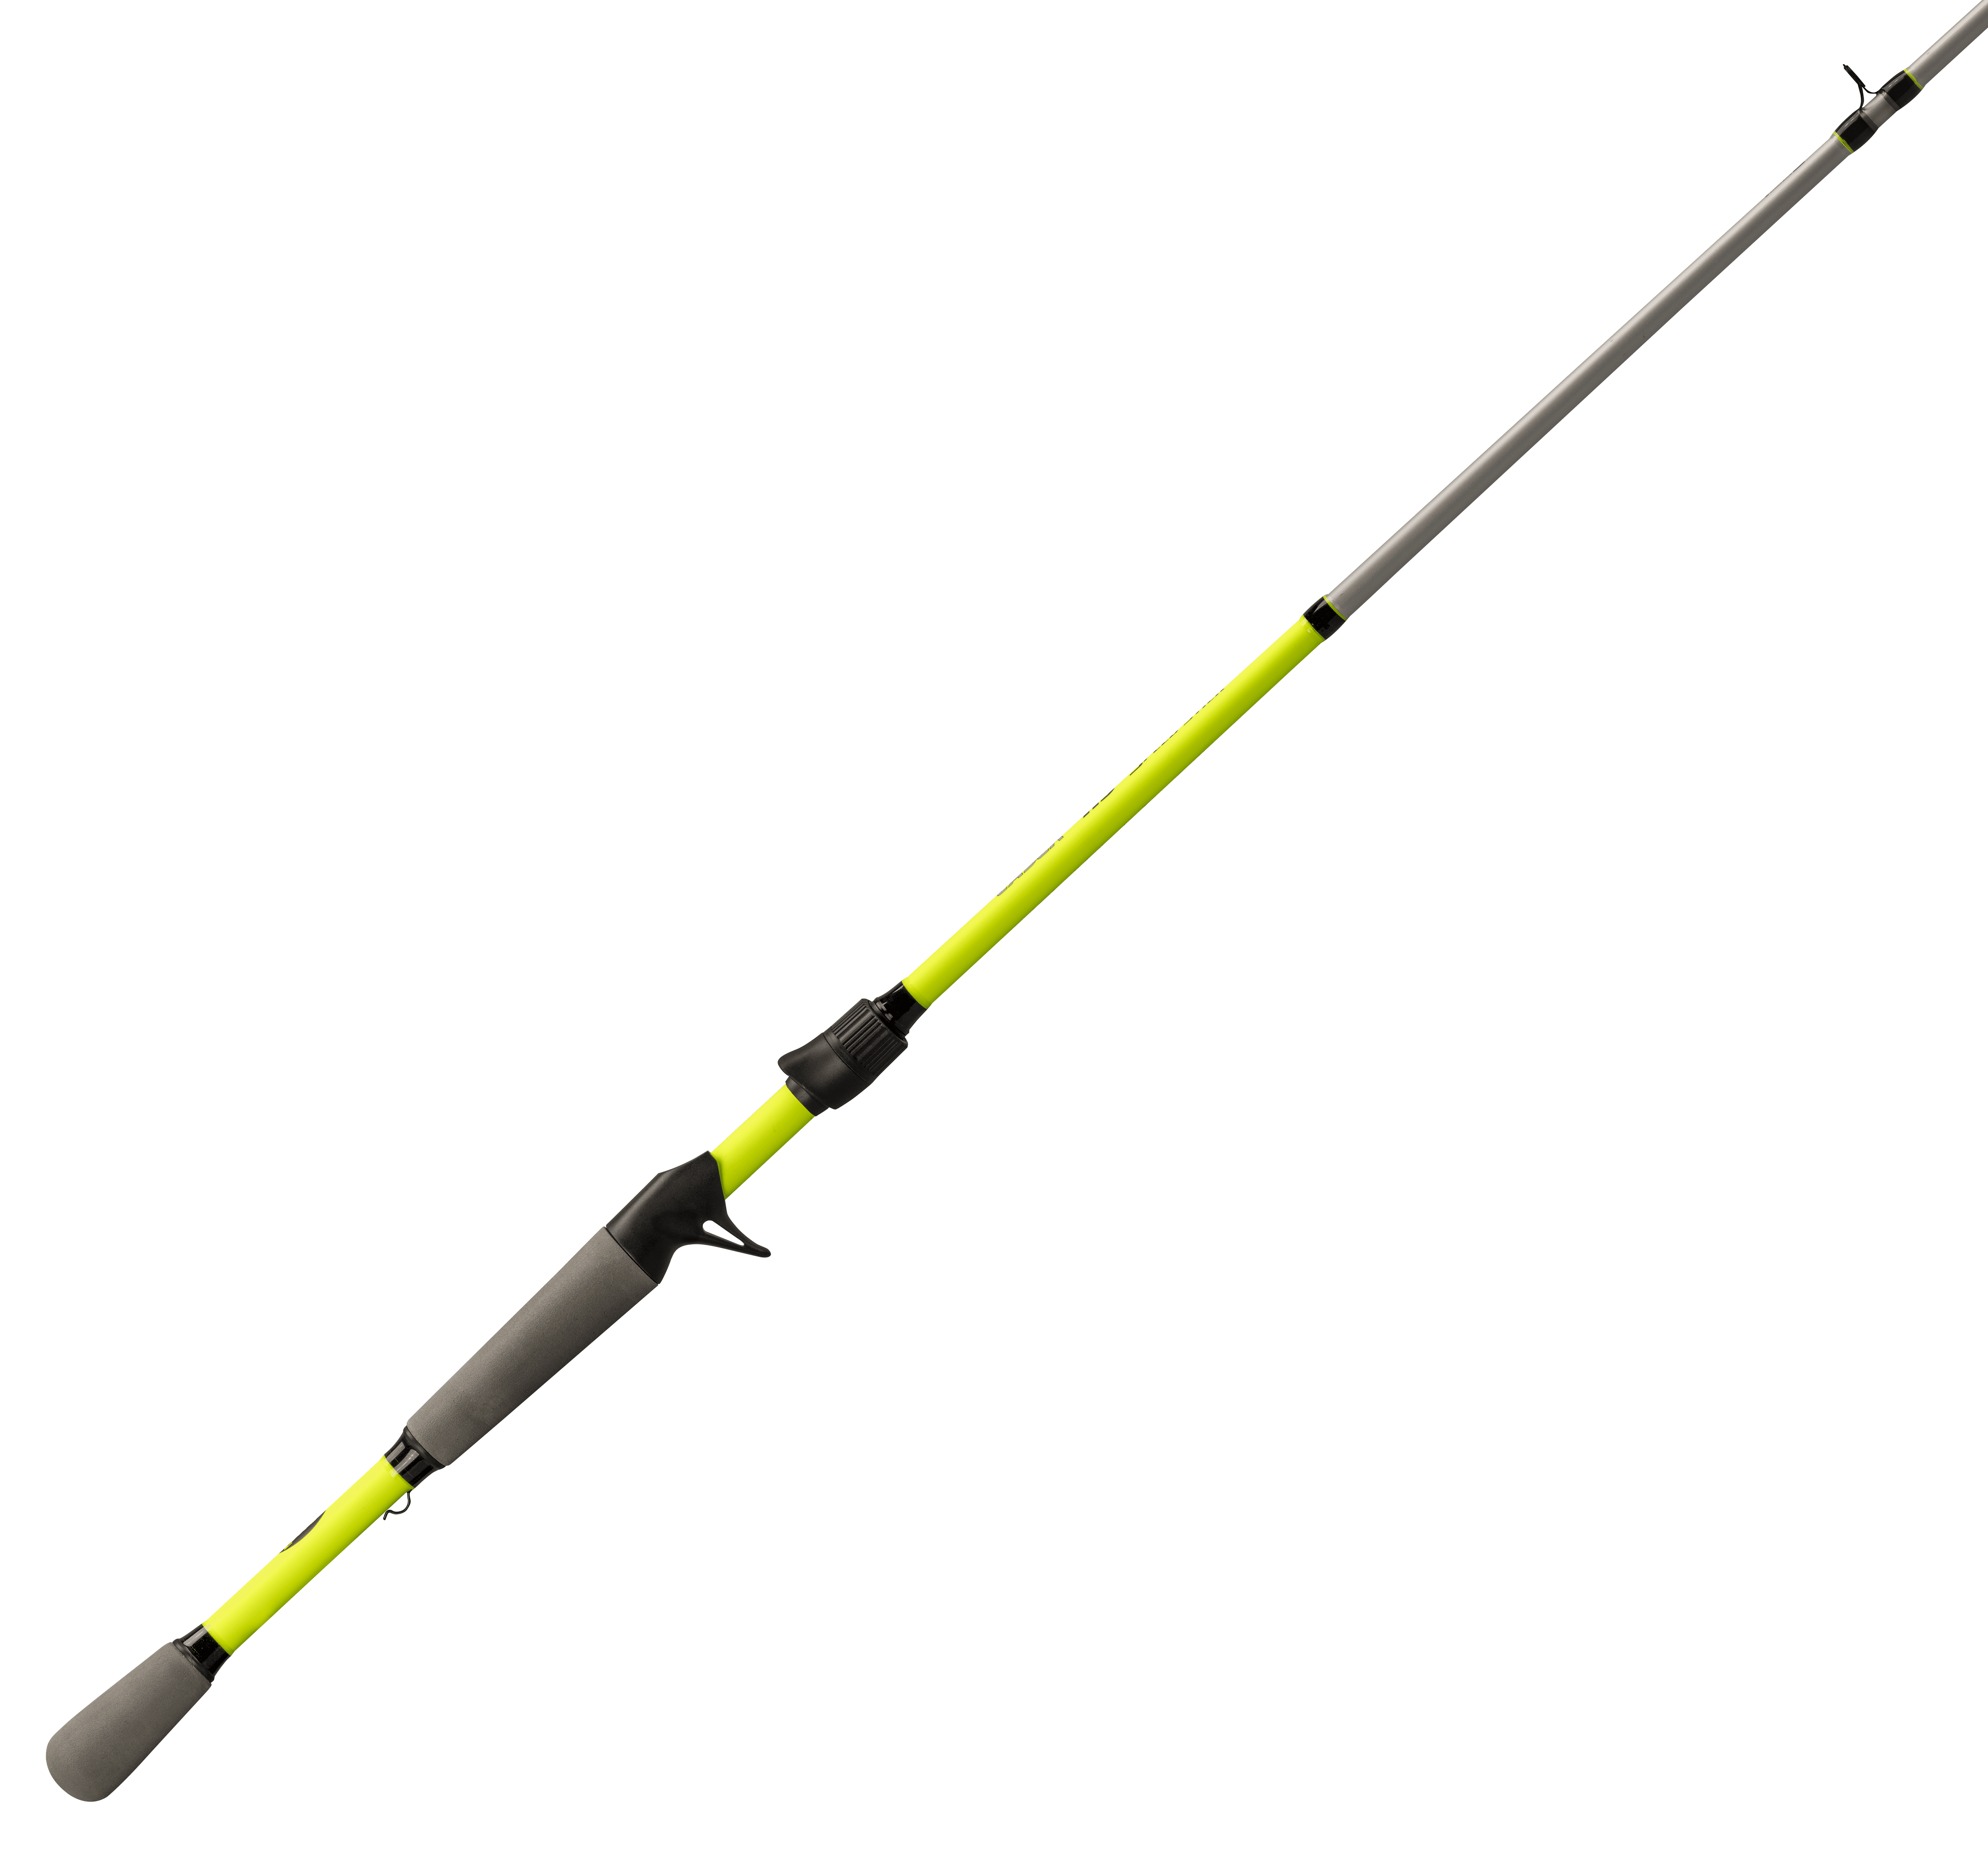 Bass Pro Shops Tourney Special Review: Is It A Good Fishing Rod